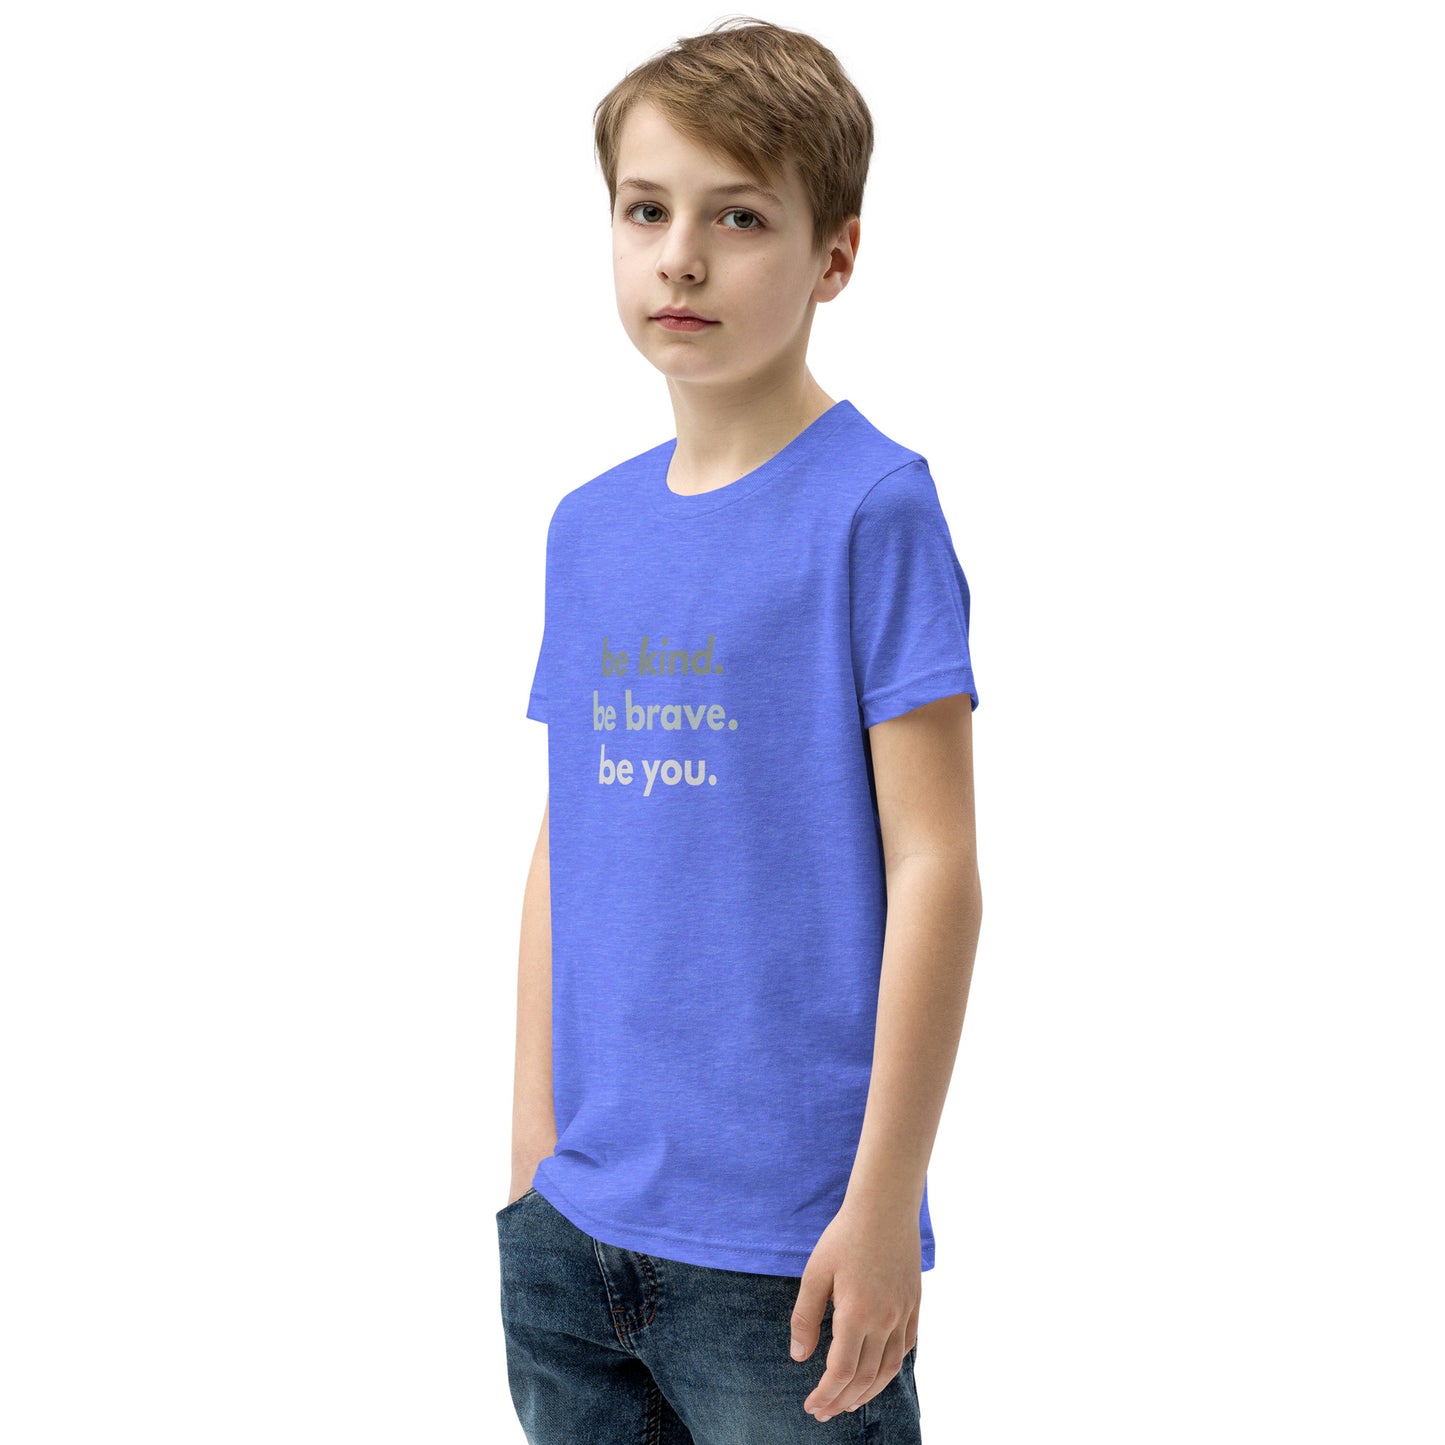 Youth Short Sleeve T-Shirt - Be kind. Be brave. Be you.